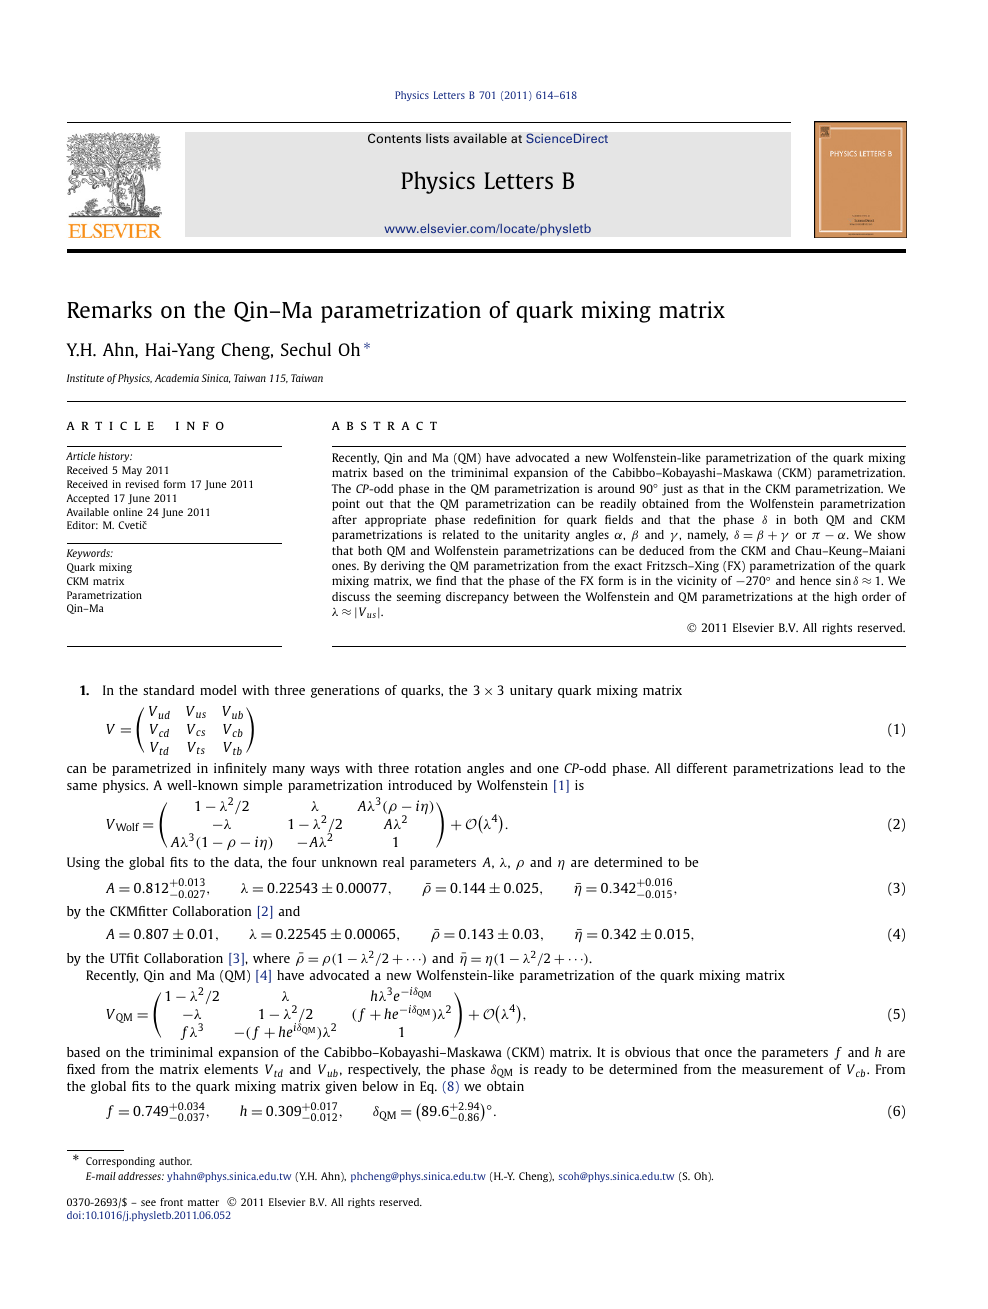 Remarks On The Qin Ma Parametrization Of Quark Mixing Matrix Topic Of Research Paper In Physical Sciences Download Scholarly Article Pdf And Read For Free On Cyberleninka Open Science Hub